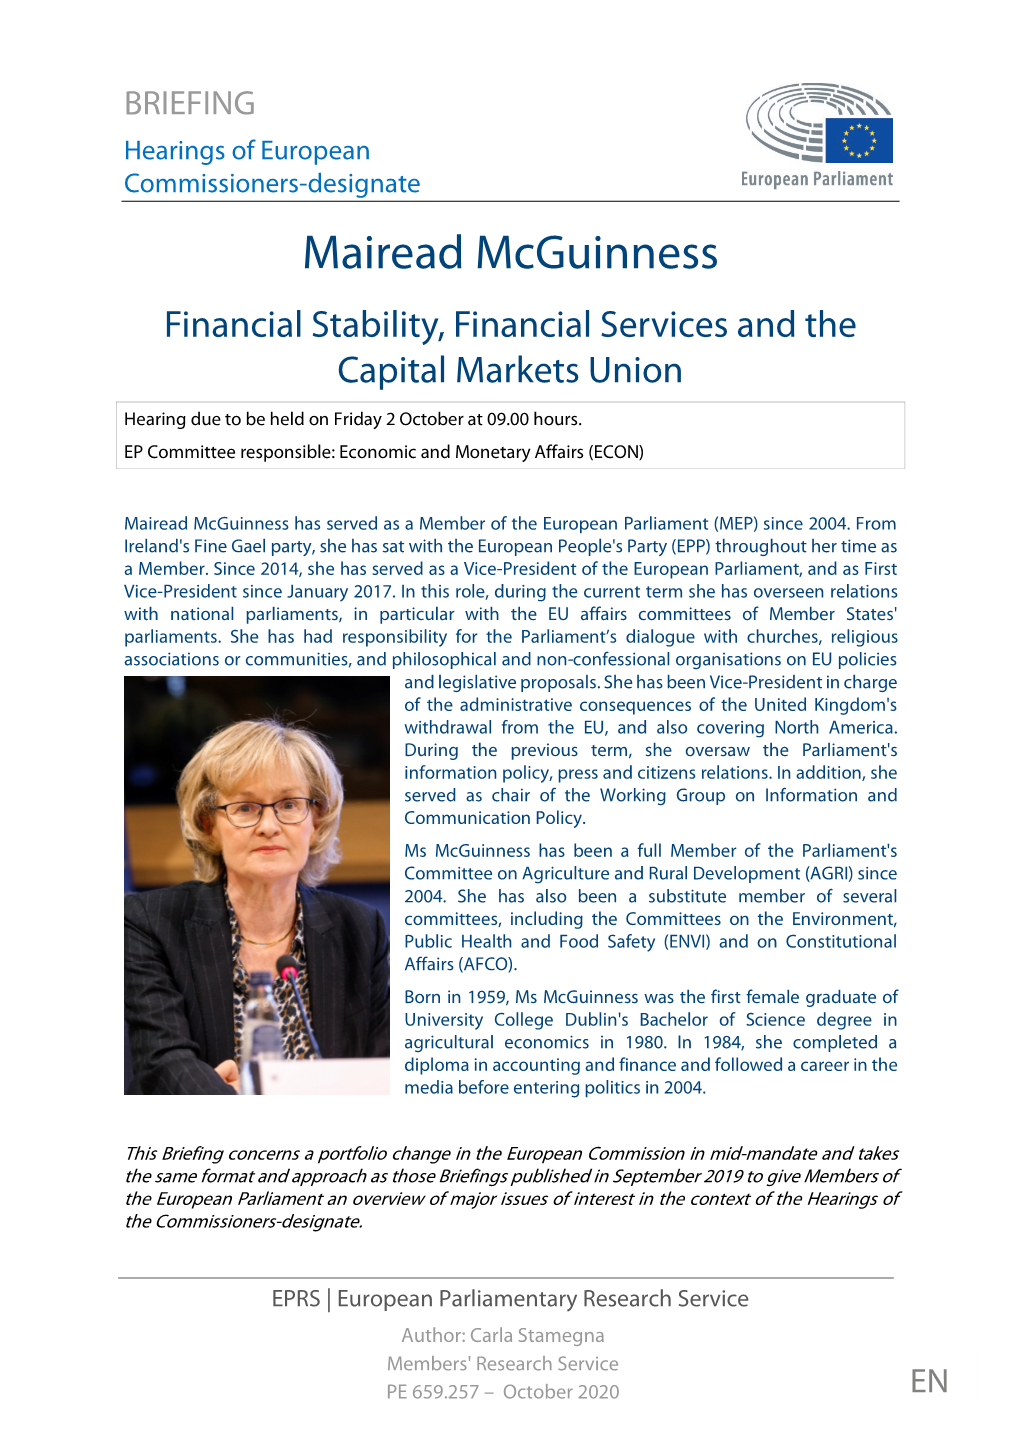 Mairead Mcguinness Financial Stability, Financial Services and the Capital Markets Union